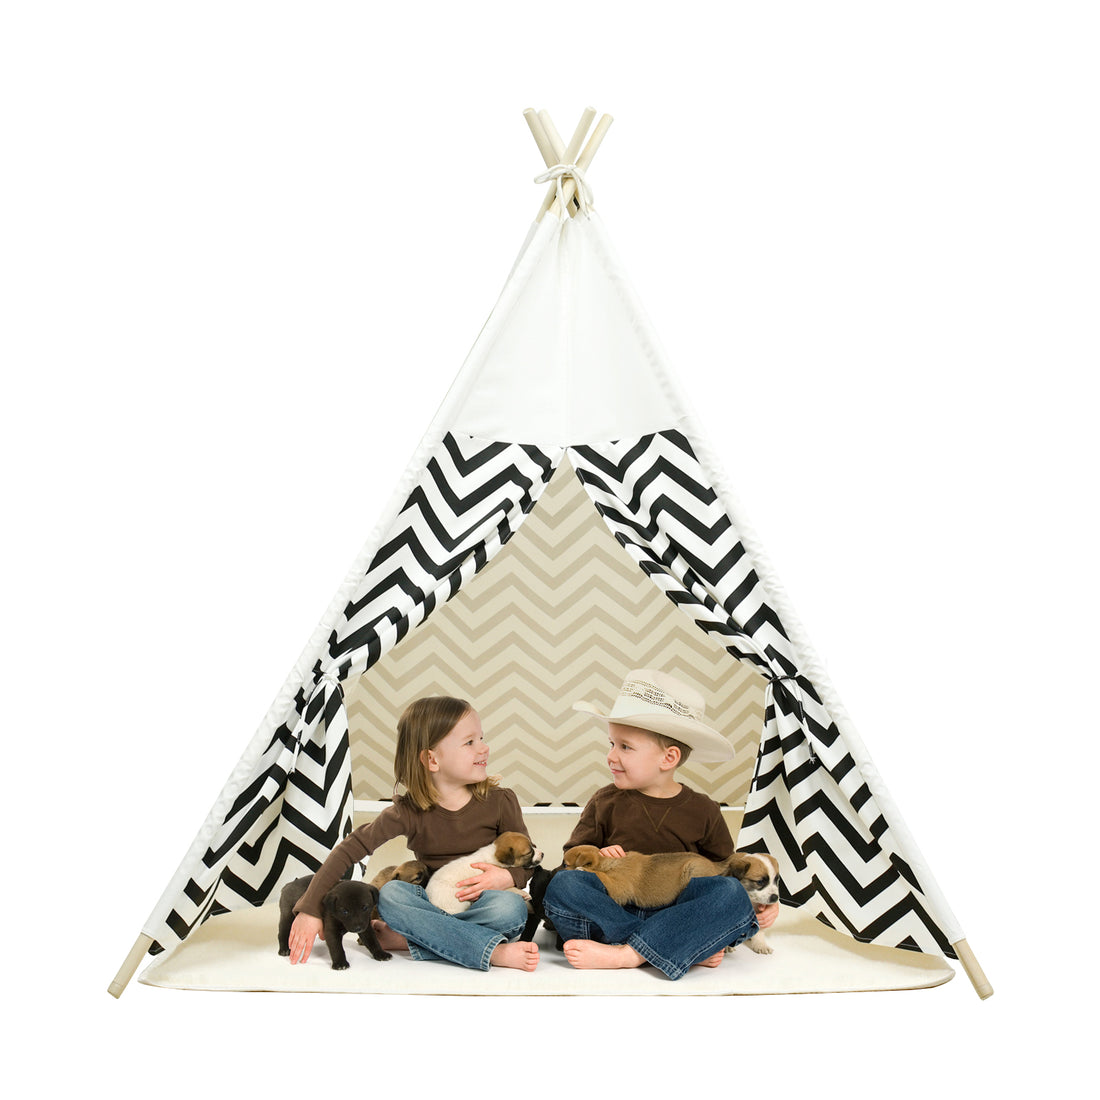 EALING BABY Kids Teepee Tent-Foldable Cotton Canvas Kids Playhouse with Tent Mat -Teepee Tent with Windows and Door Curtains -Outdoor andIndoor Playhouse- White  Chevron Play Tent for Boys and Girls